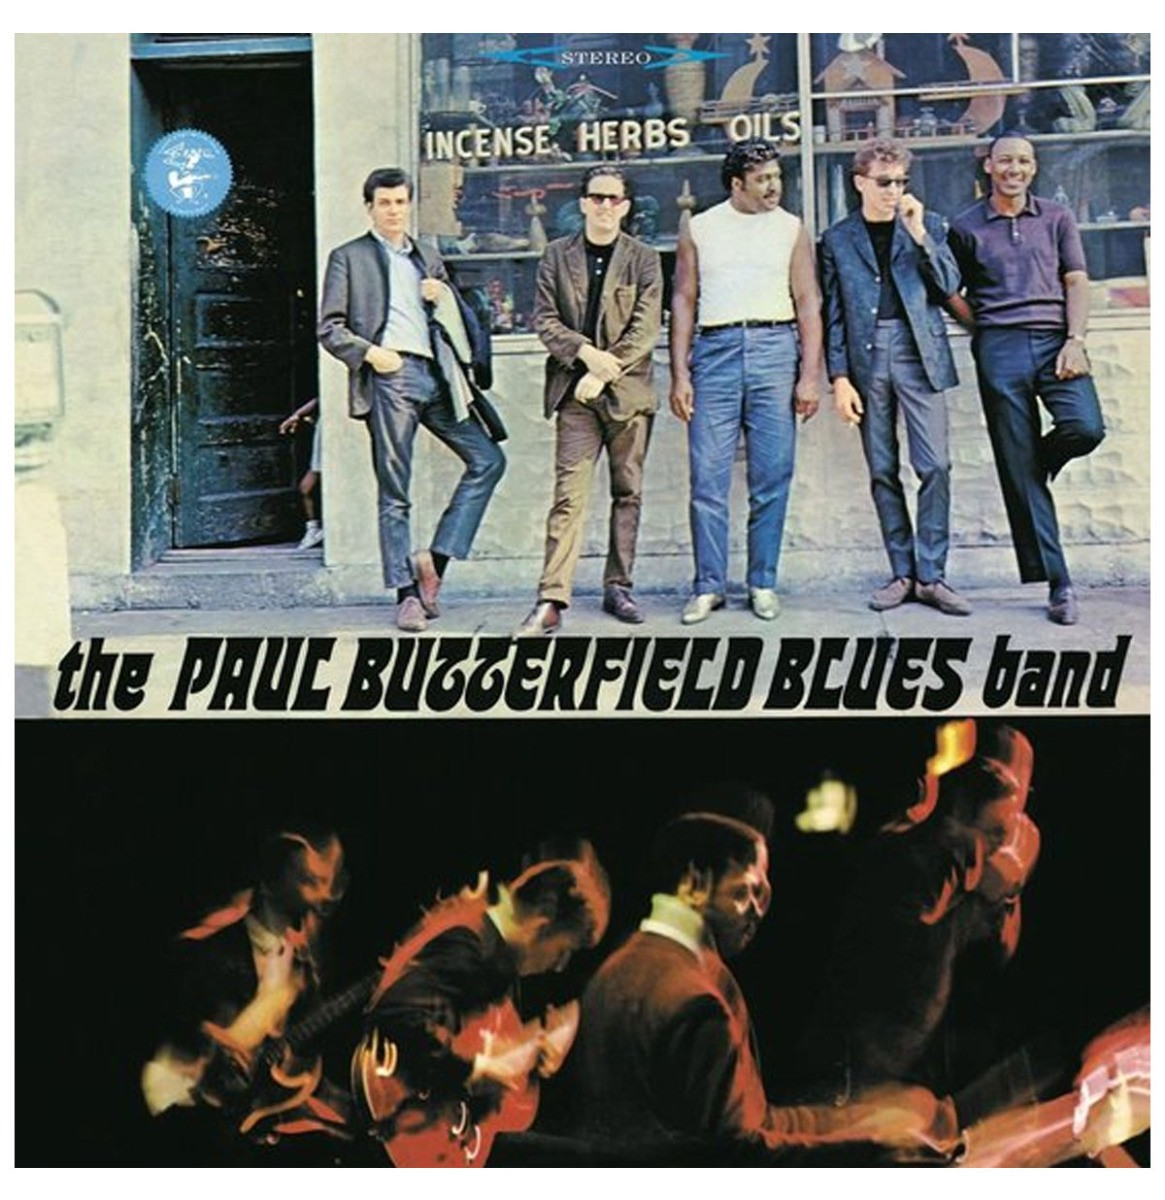 The Paul Butterfield Blues Band LP